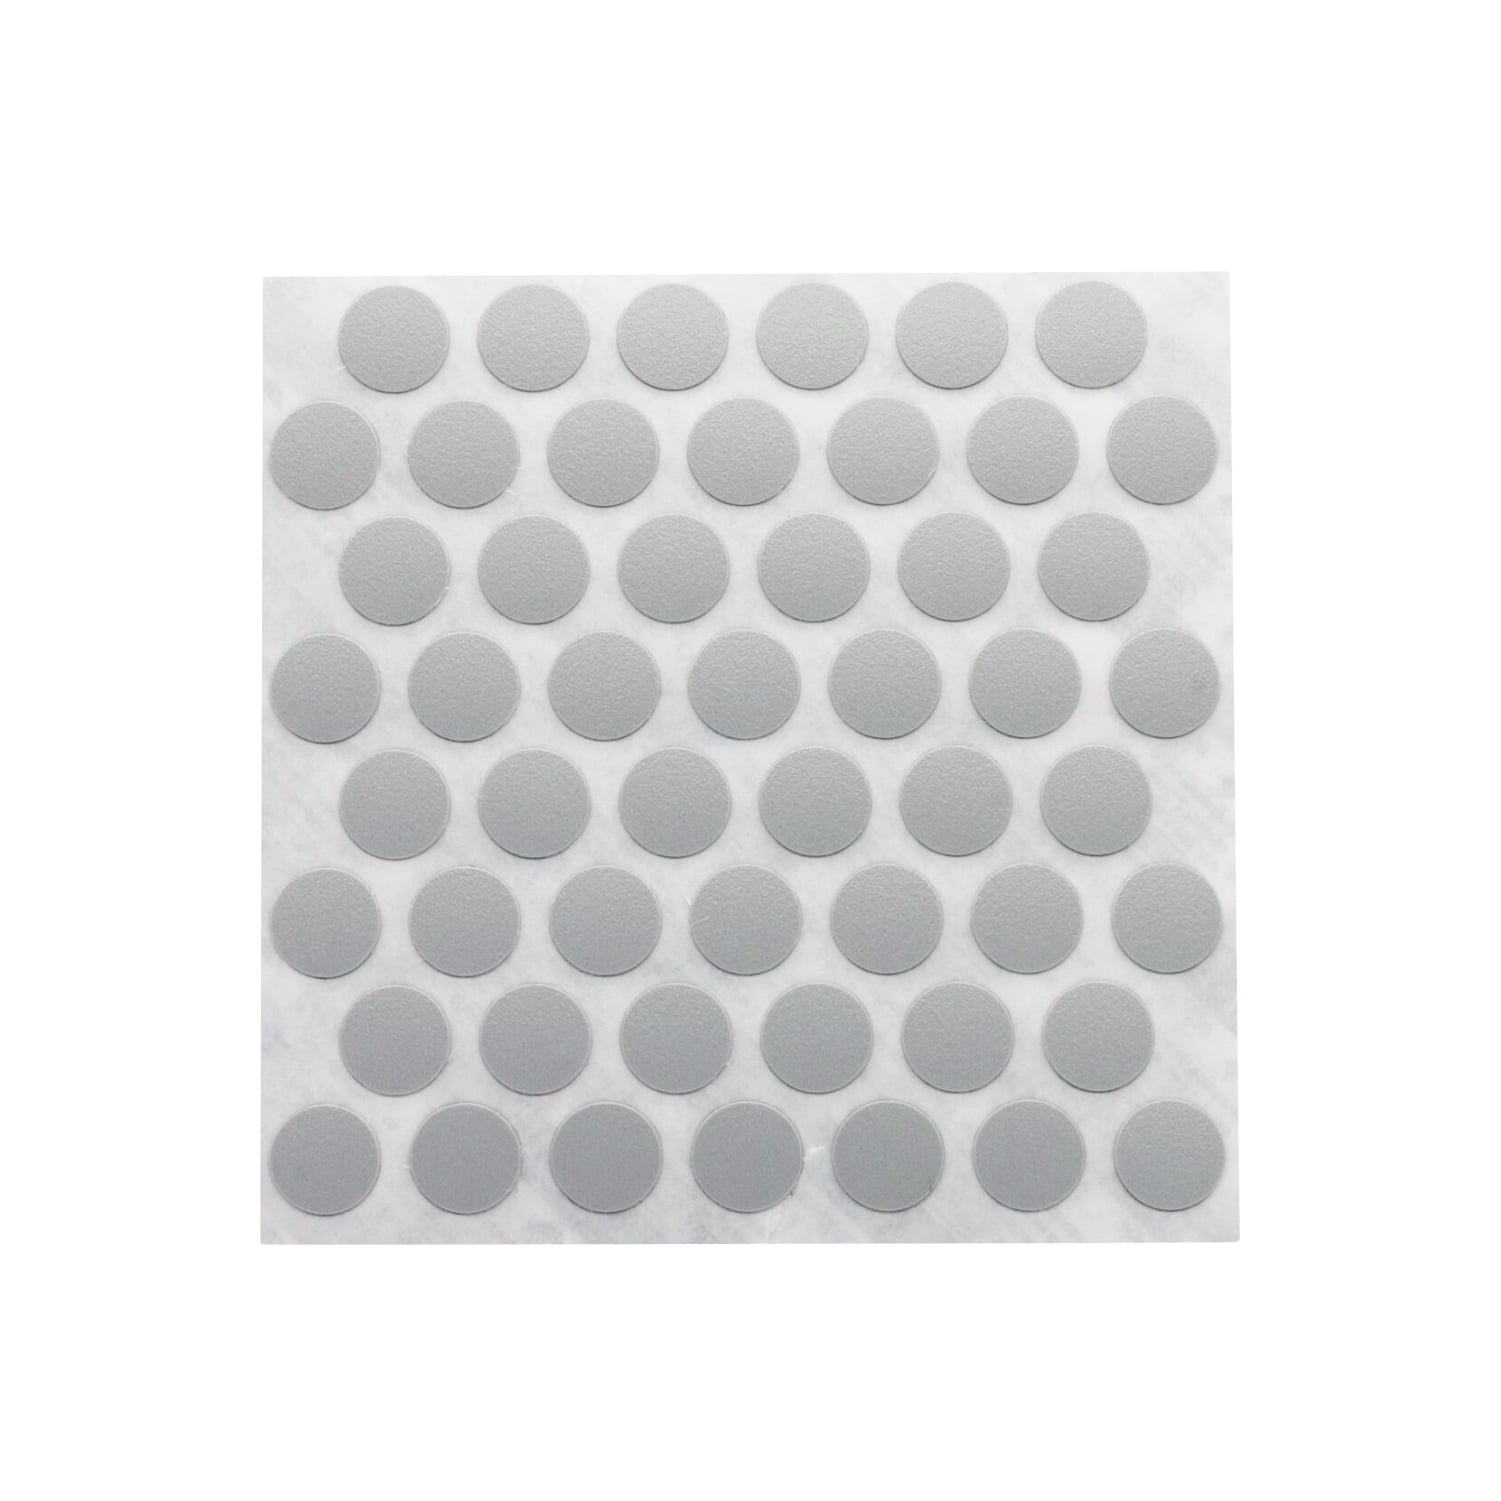 Details about    Self-Adhesive Screw Hole Stickers,2-Table 96 in 1 Self-Adhesive Screw Covers Ca 